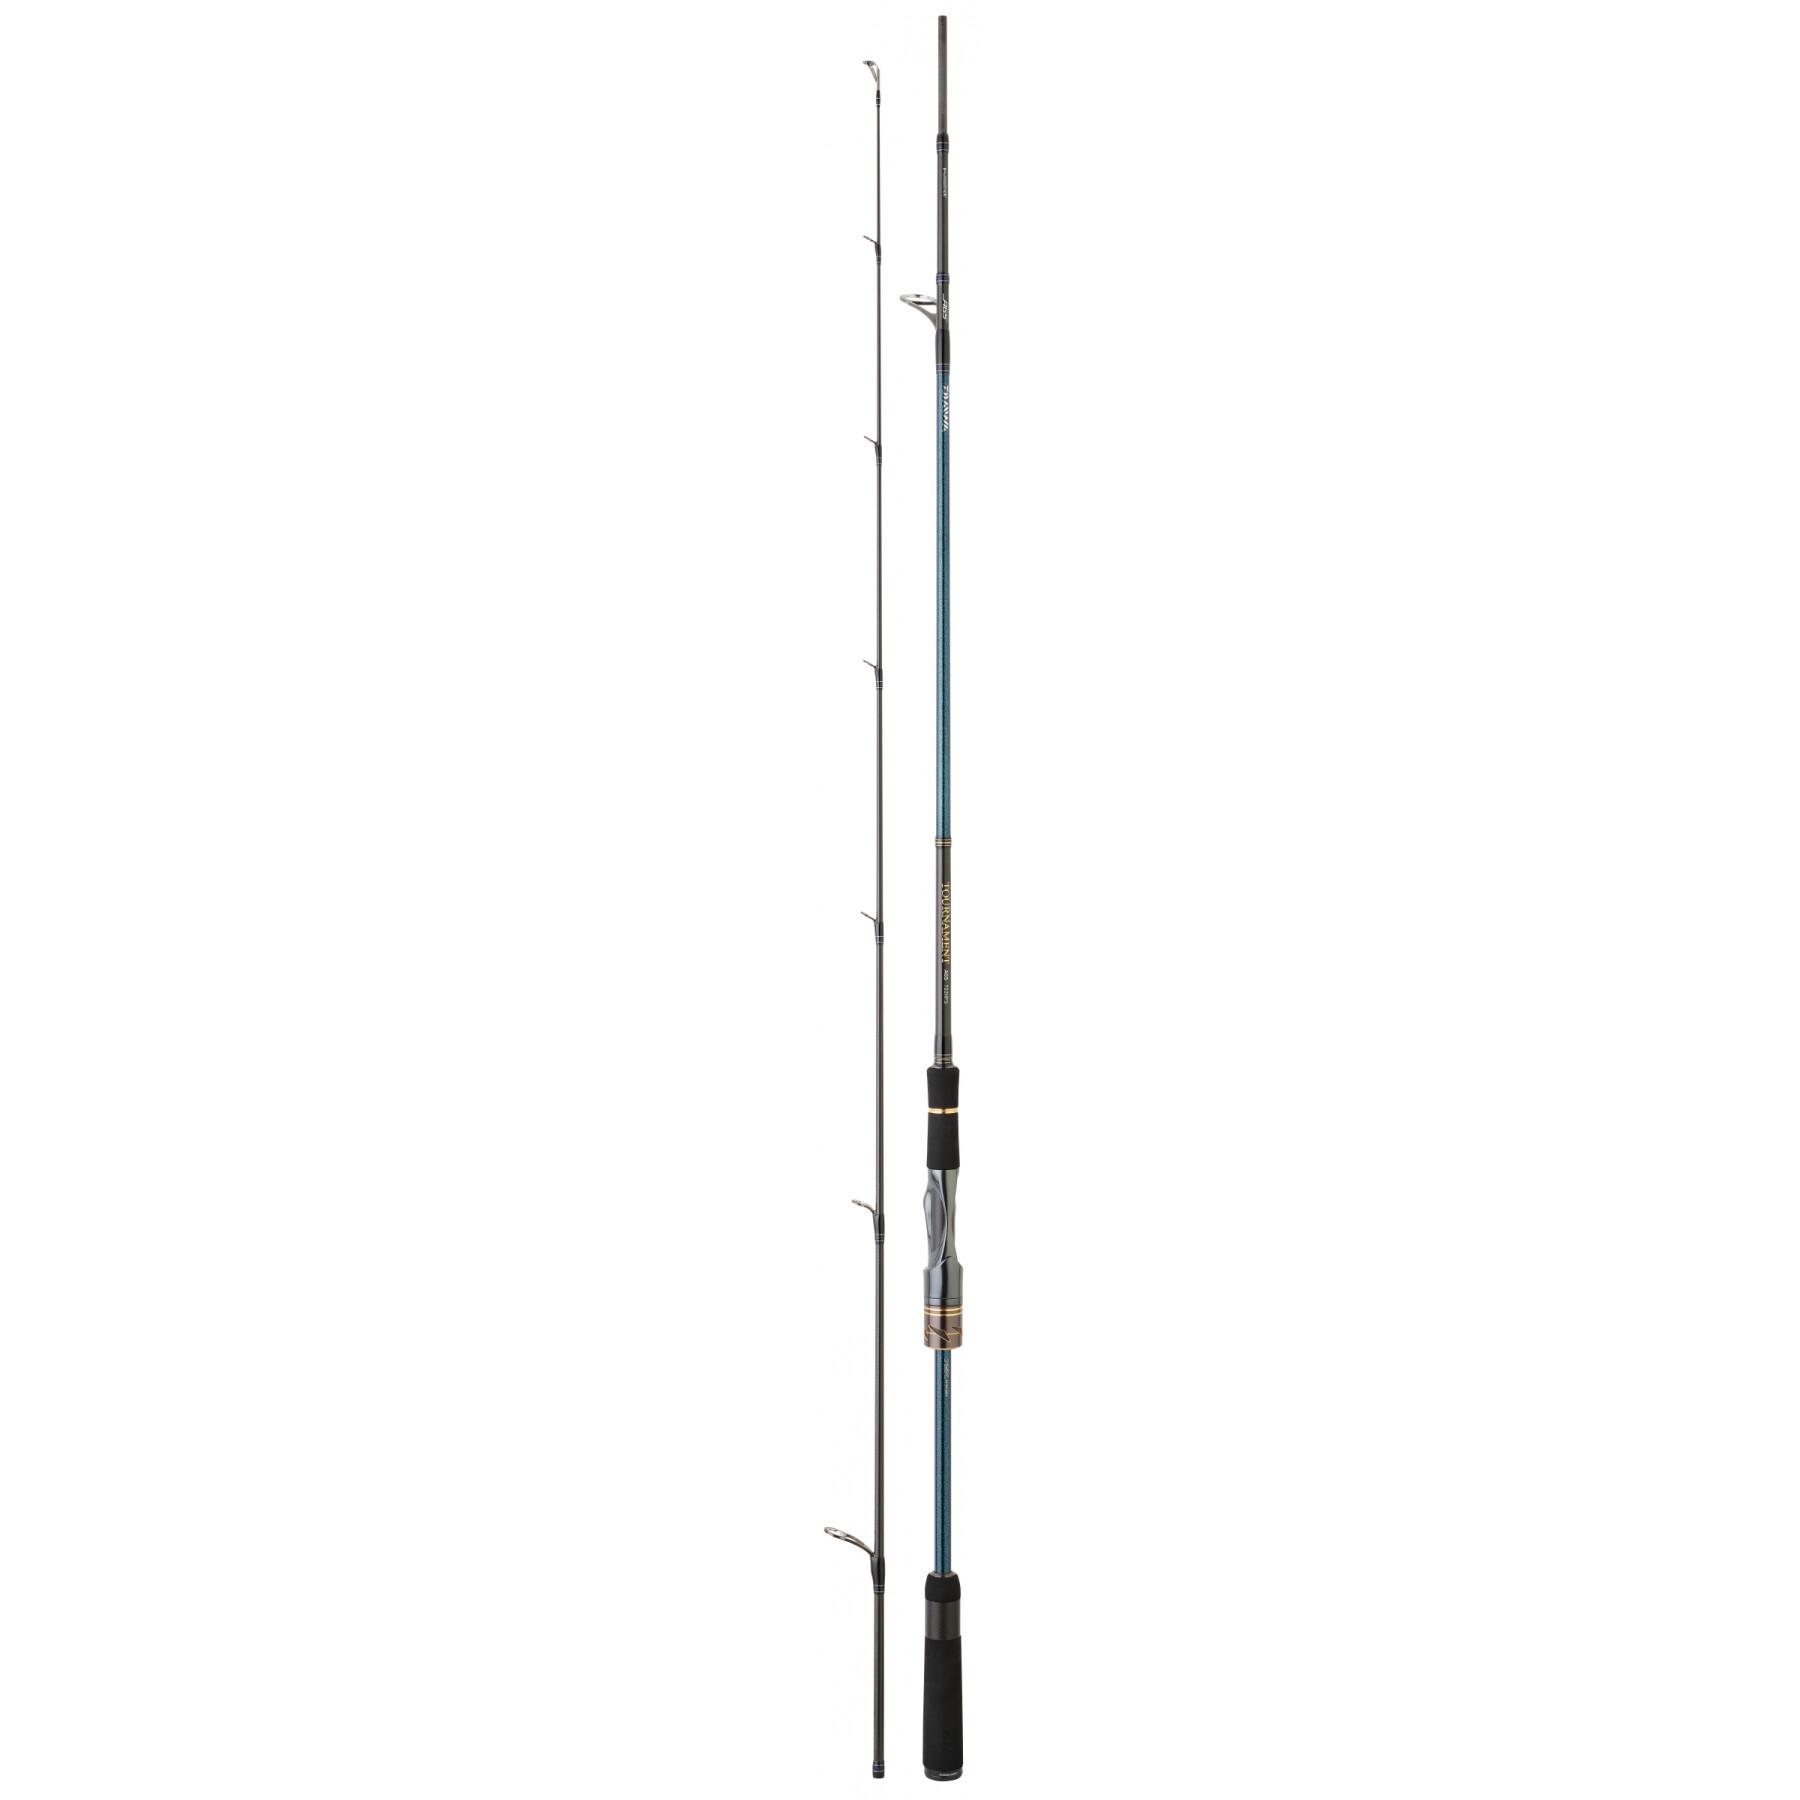 Canne surfcasting Daiwa Tournament AGS 702 HFS 14-42 g